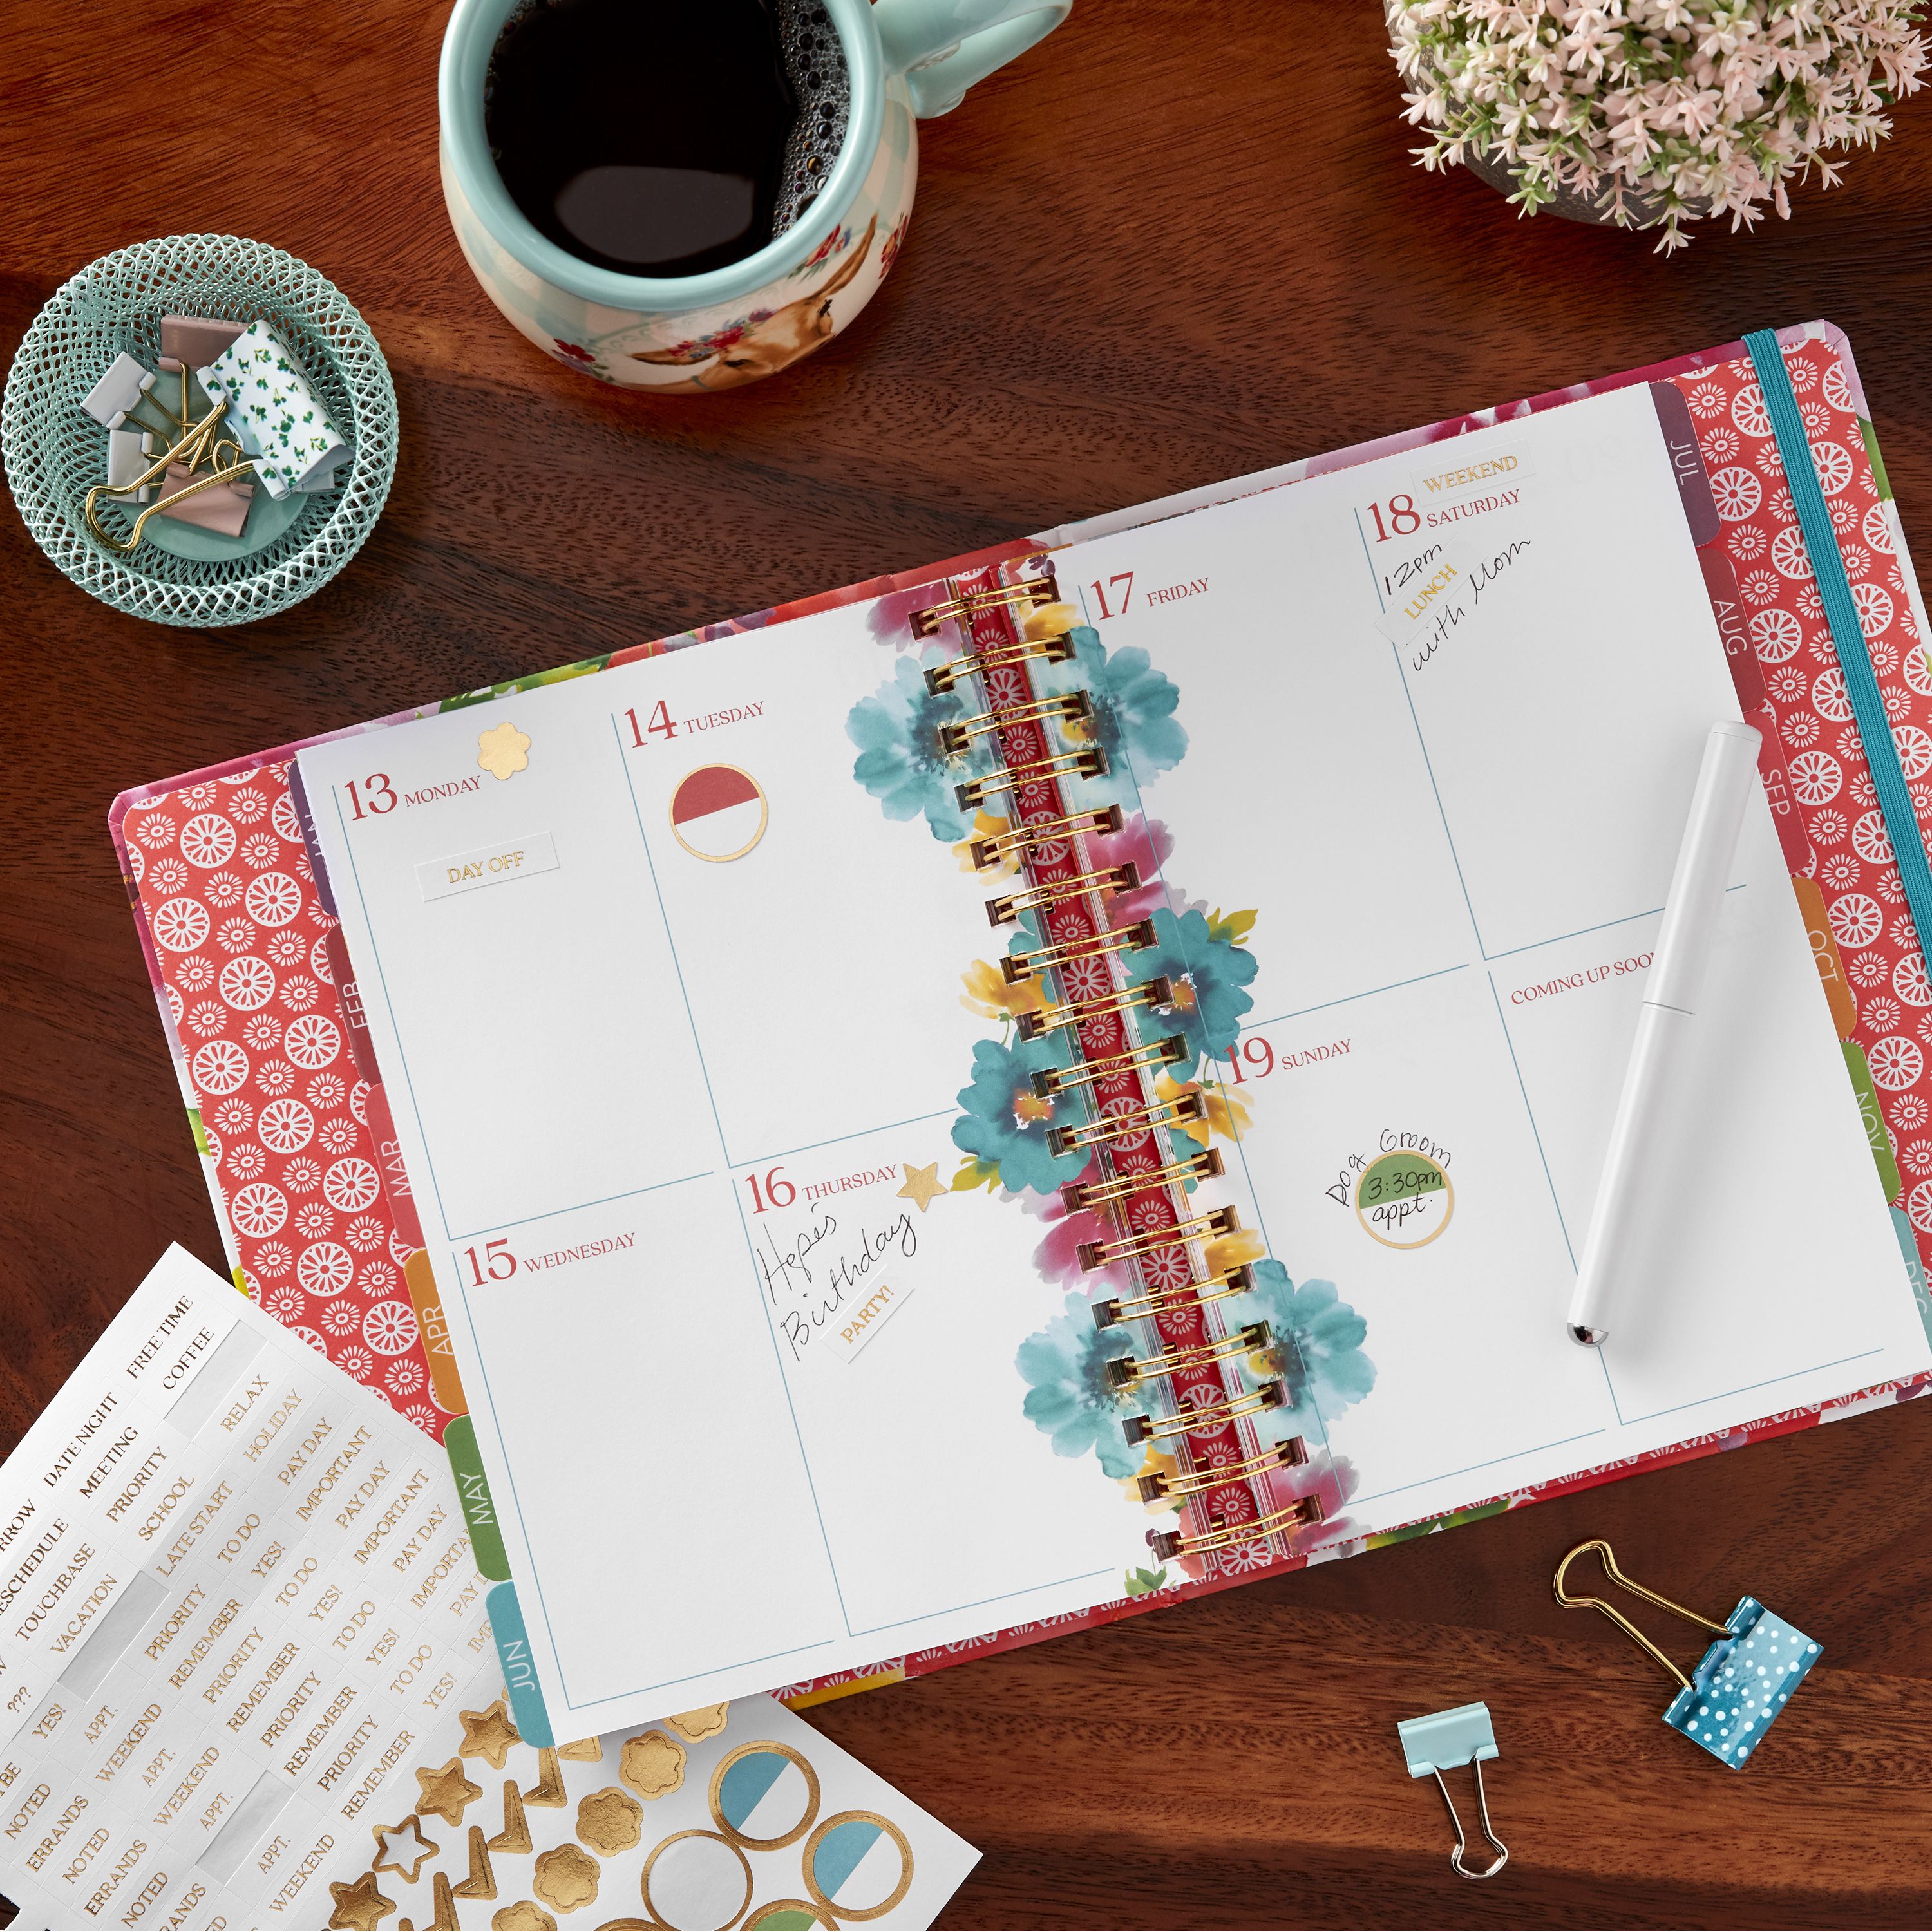 The Pioneer Woman Stationery at Walmart Where to Buy Ree Drummond's